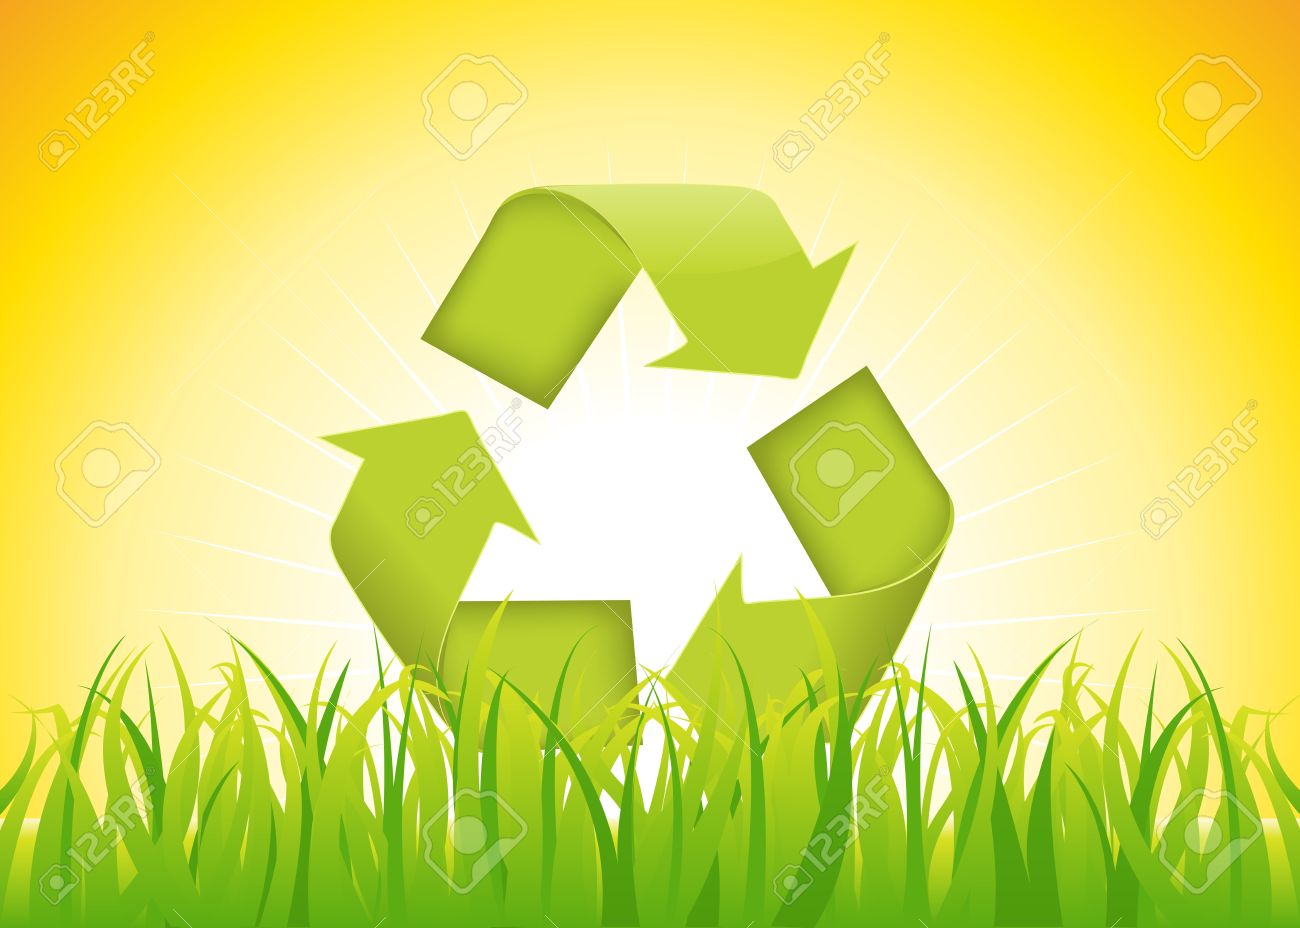 Illustration Of The Recyclable Eco Symbol On A Summer Background